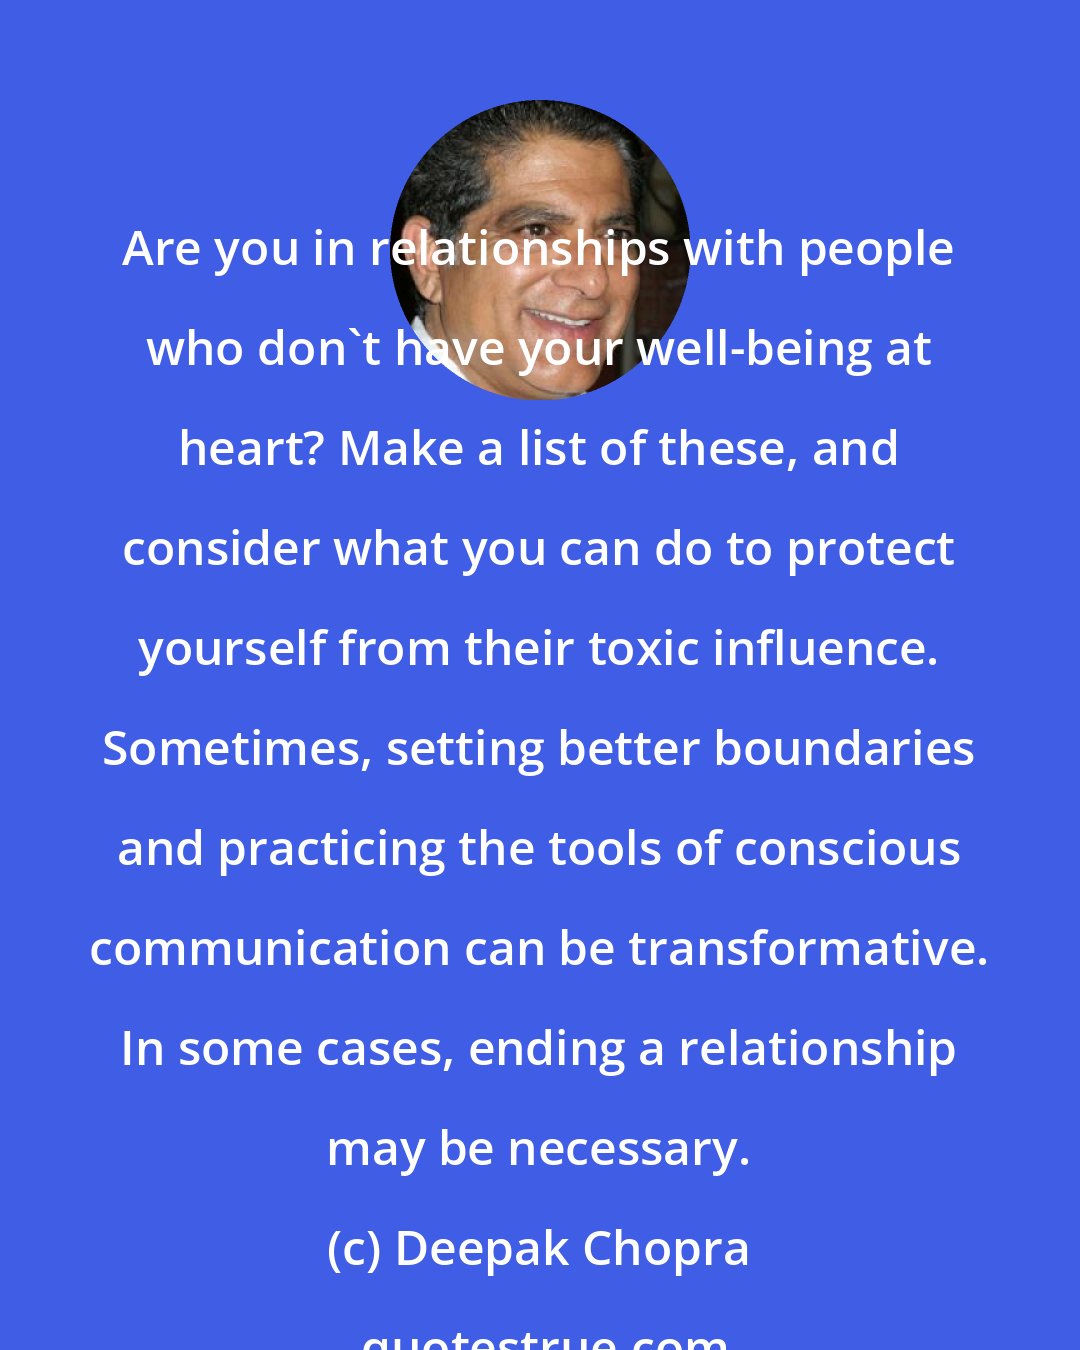 Deepak Chopra: Are you in relationships with people who don't have your well-being at heart? Make a list of these, and consider what you can do to protect yourself from their toxic influence. Sometimes, setting better boundaries and practicing the tools of conscious communication can be transformative. In some cases, ending a relationship may be necessary.